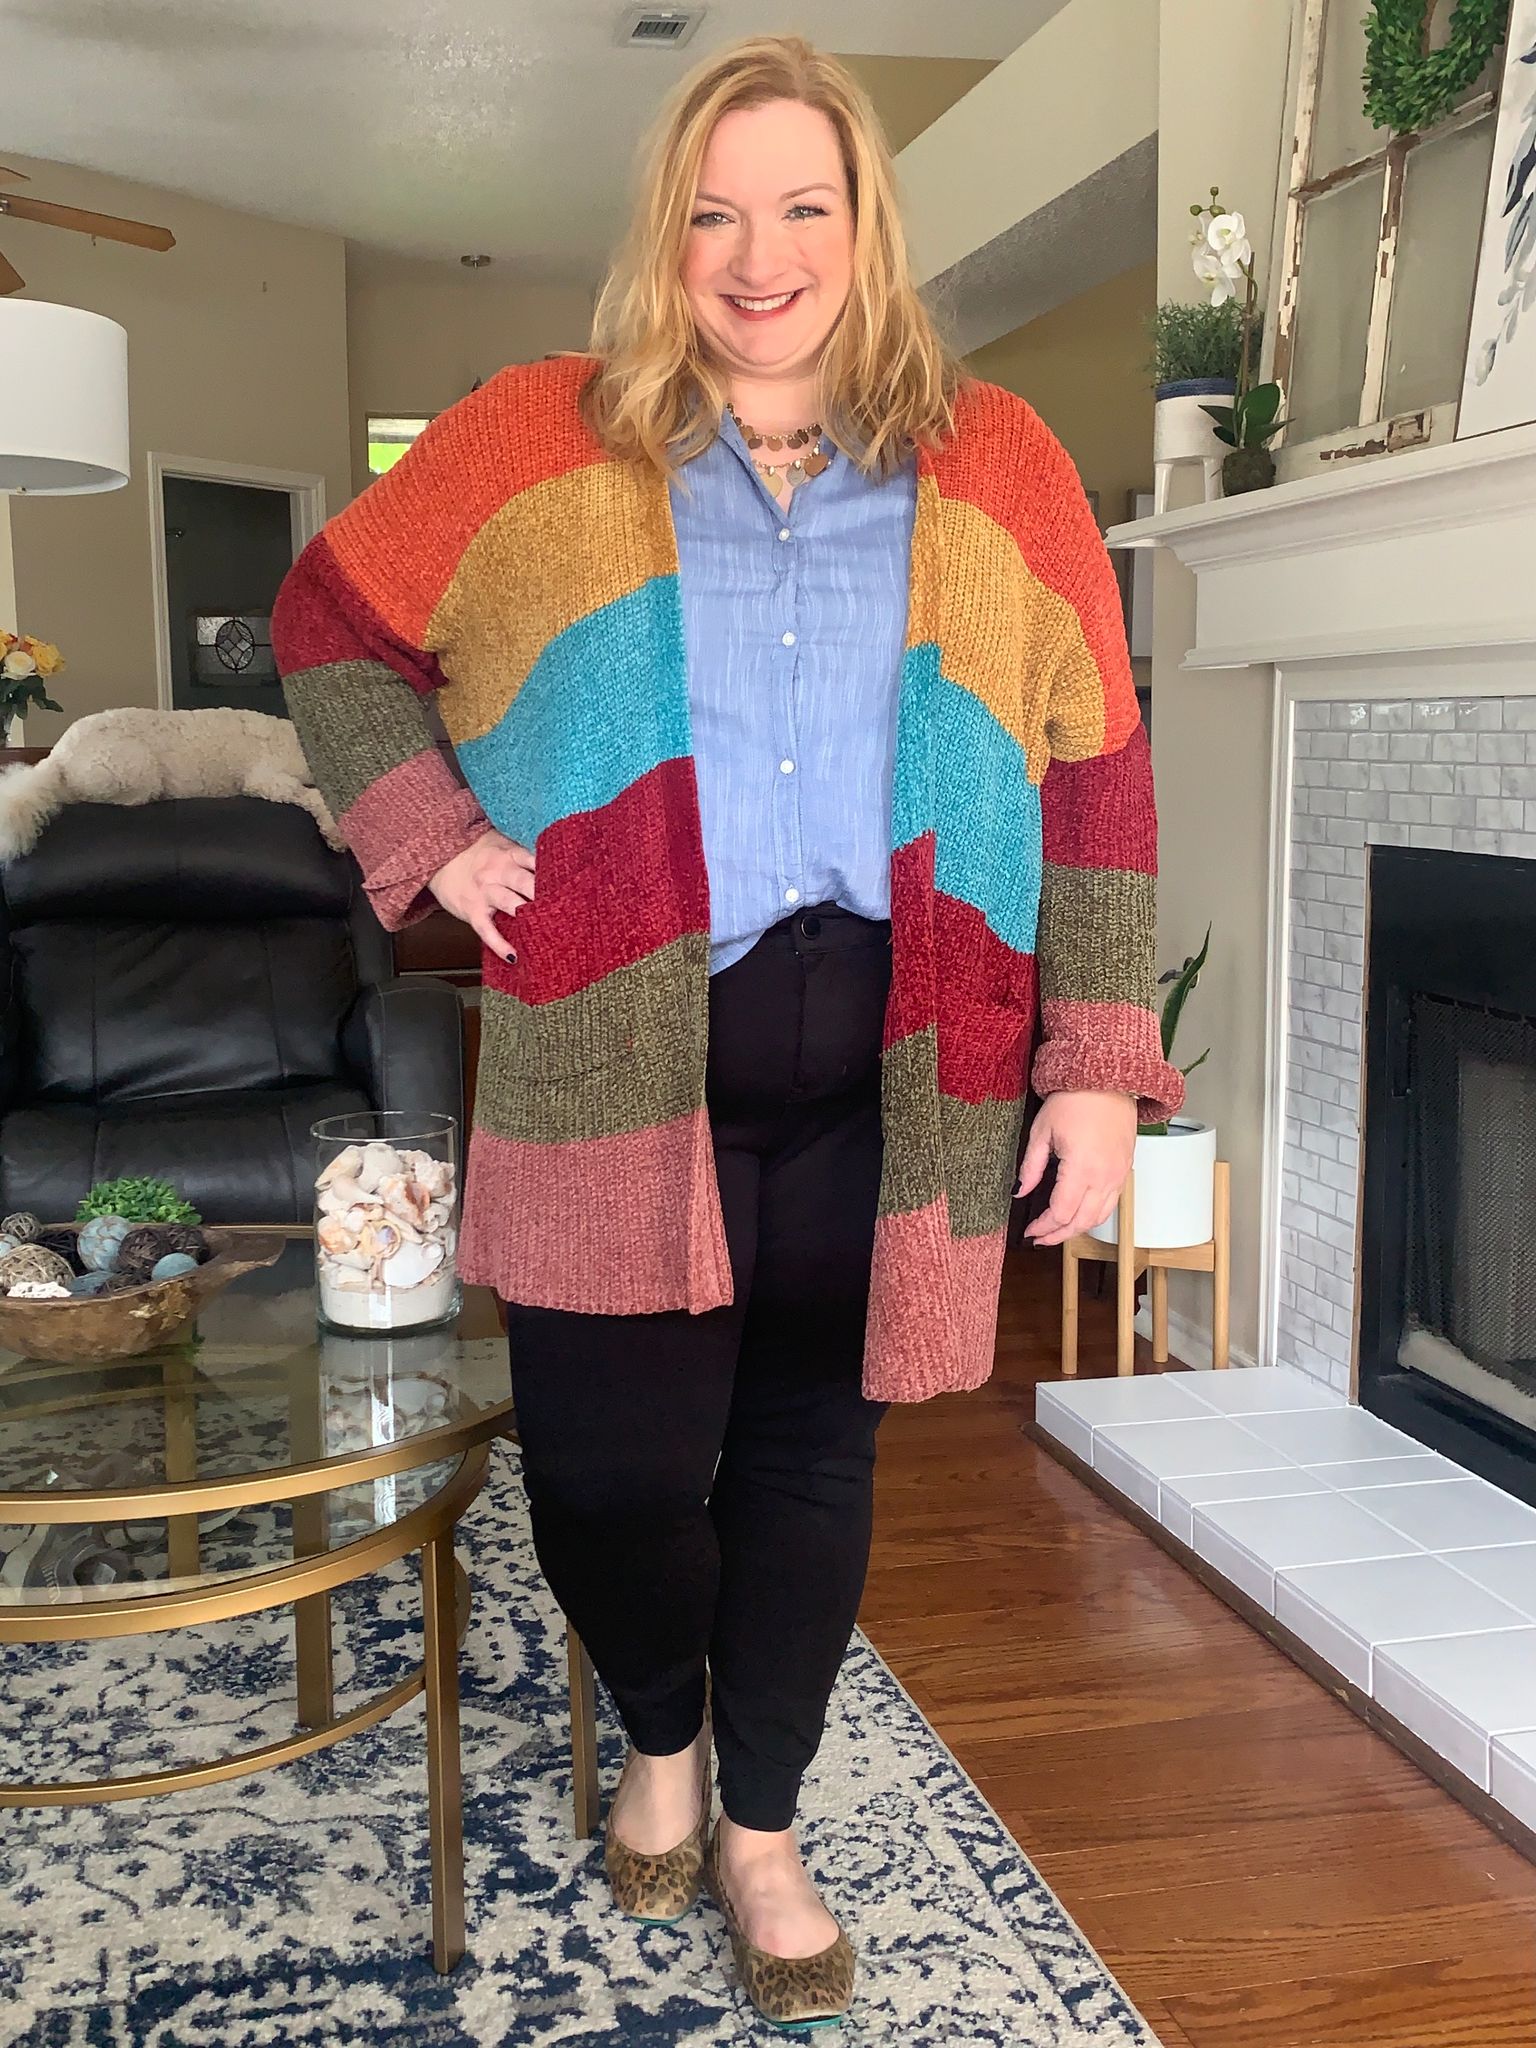 Plus size woman posing in her living room, wearing a chambray button down shirt, multi colored/striped sweater, black pants, and animal print flats.